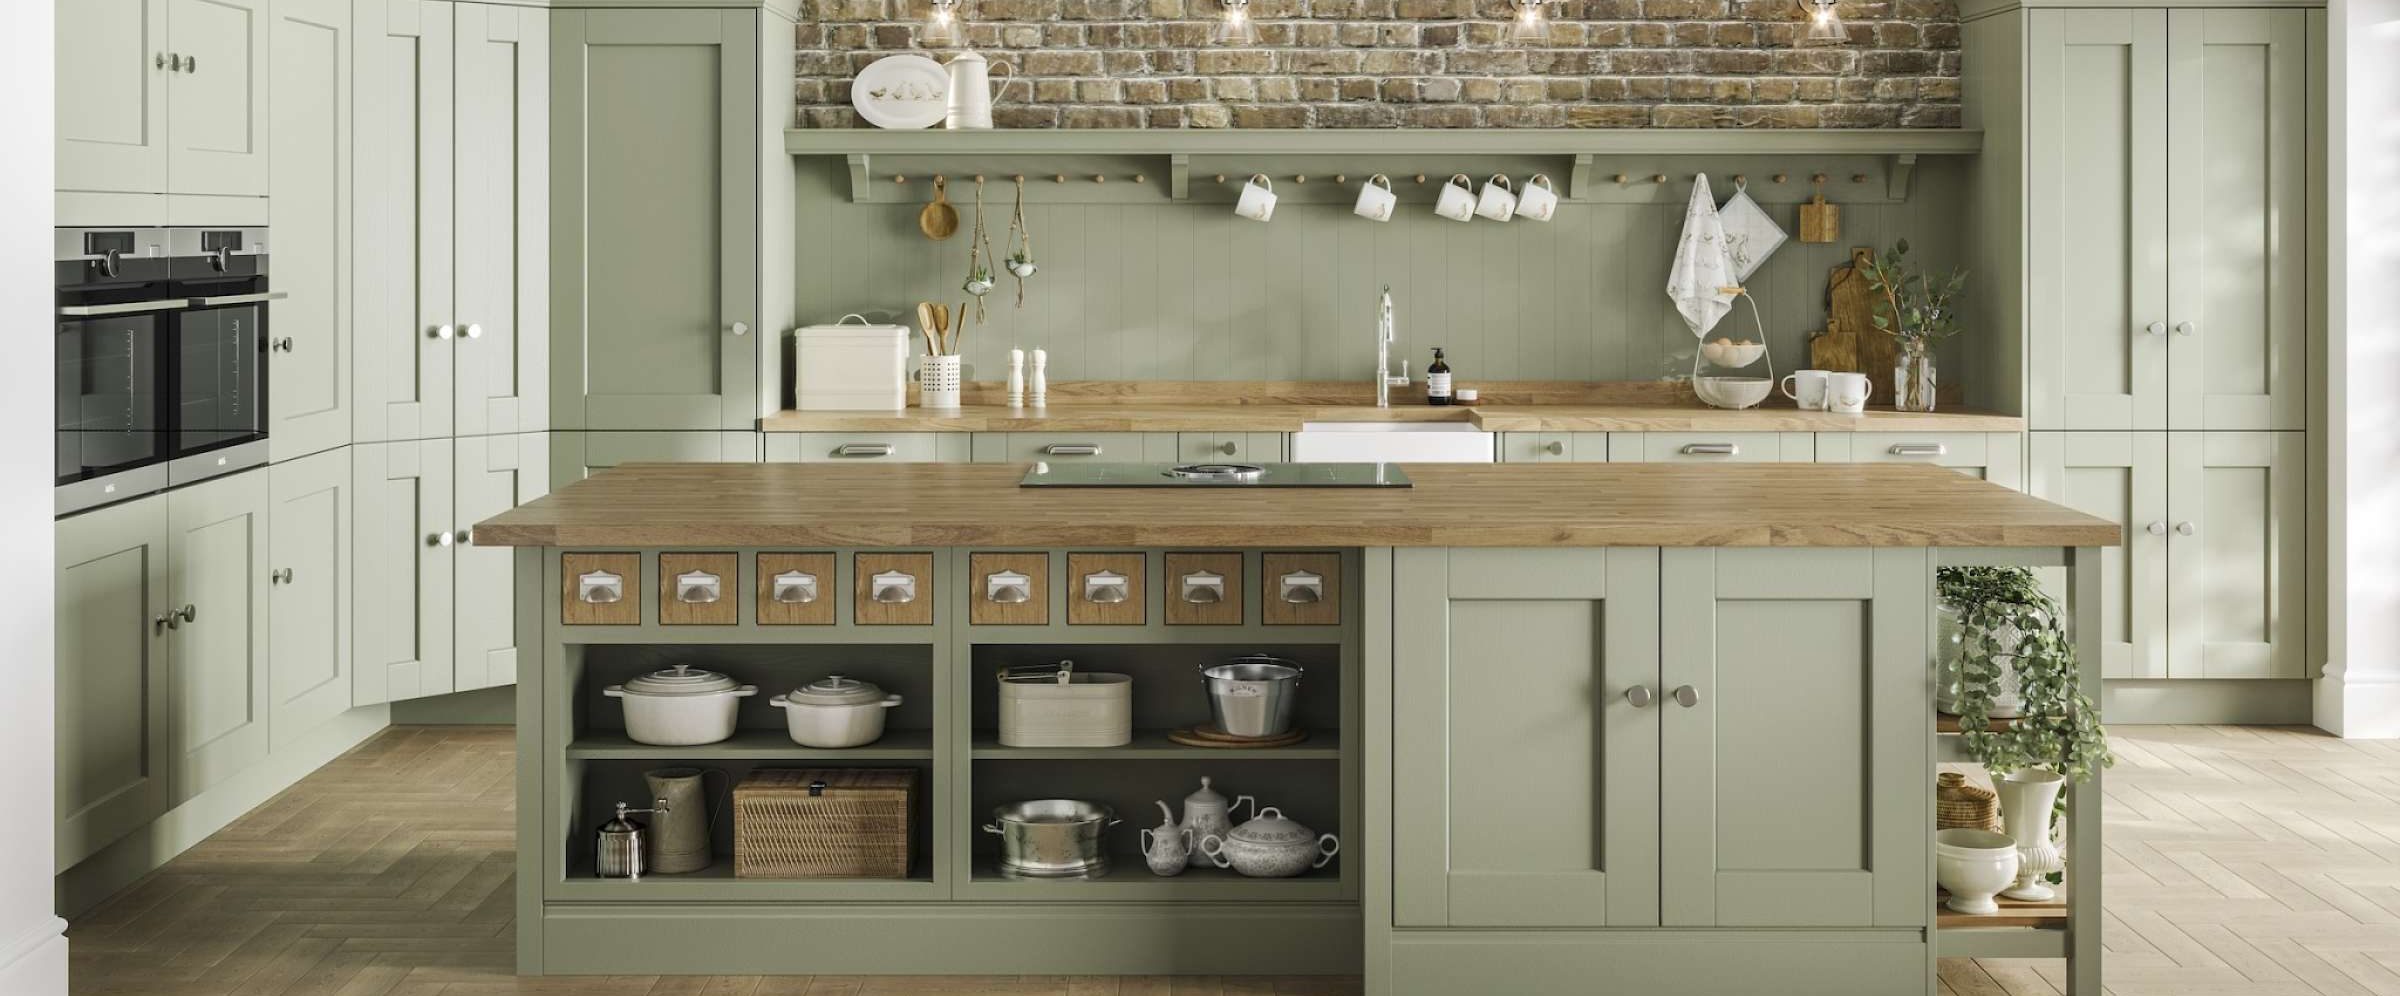 Whitby Atlantic Green Gallery Kitchen